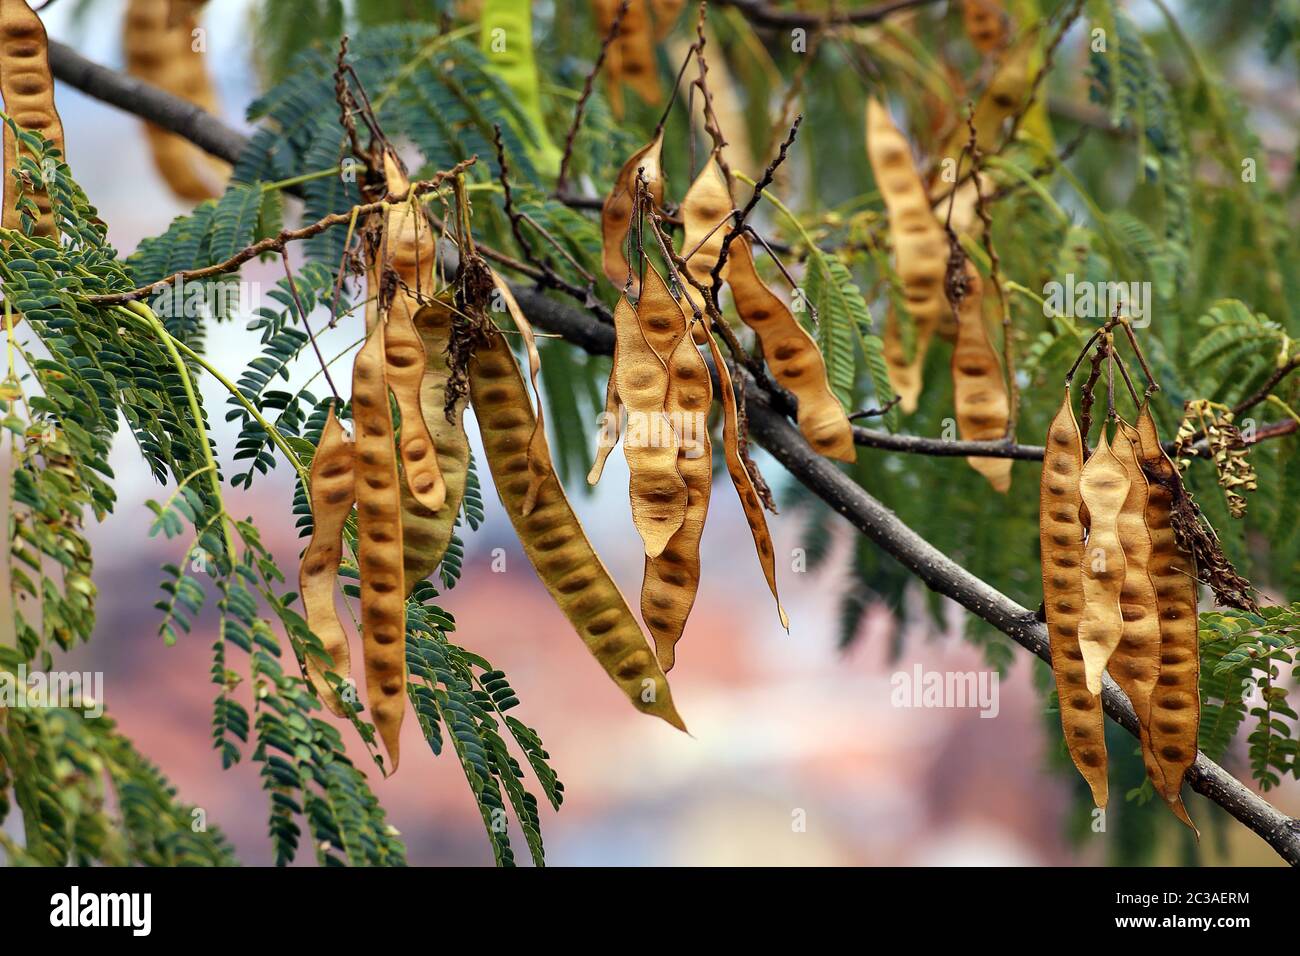 Legumes from the albizia julibrissin sleeping tree Stock Photo